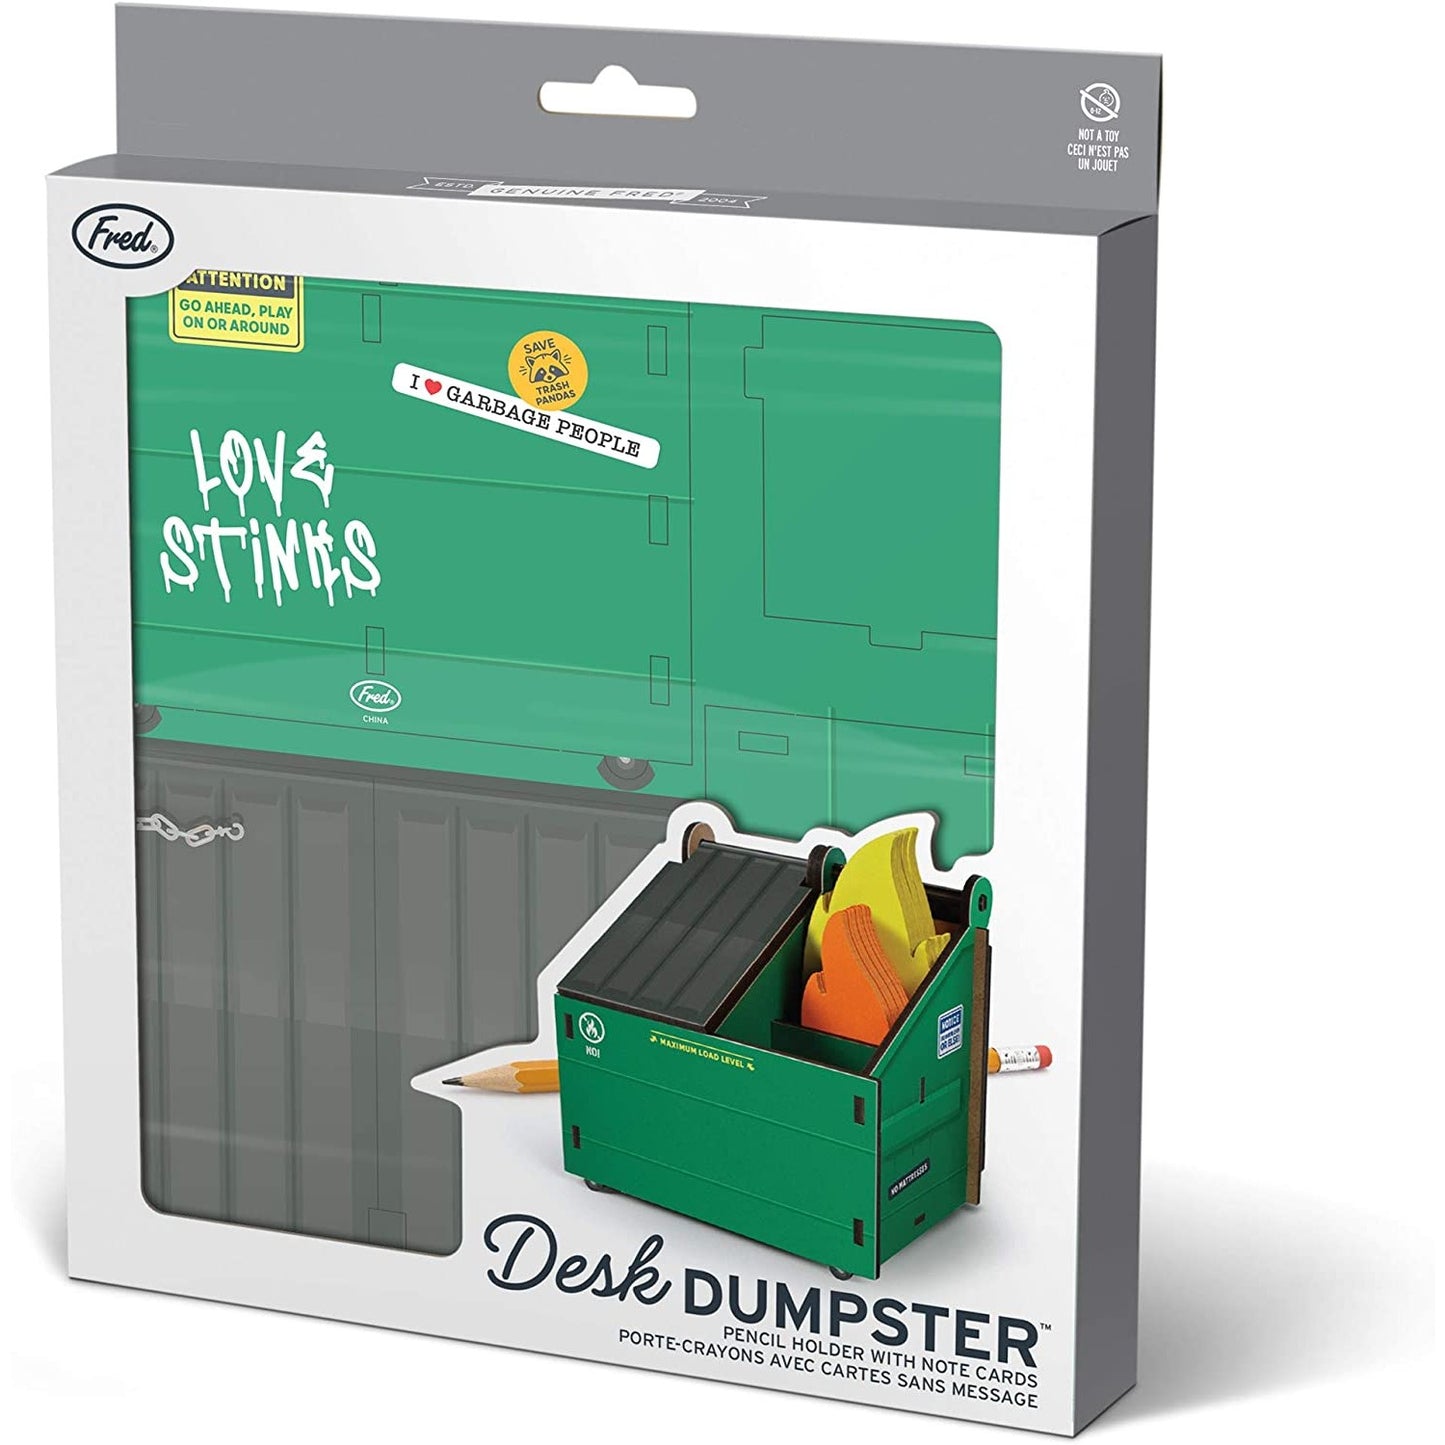 The packaging of a dumpster fire desk caddy designed by Genuine Fred.